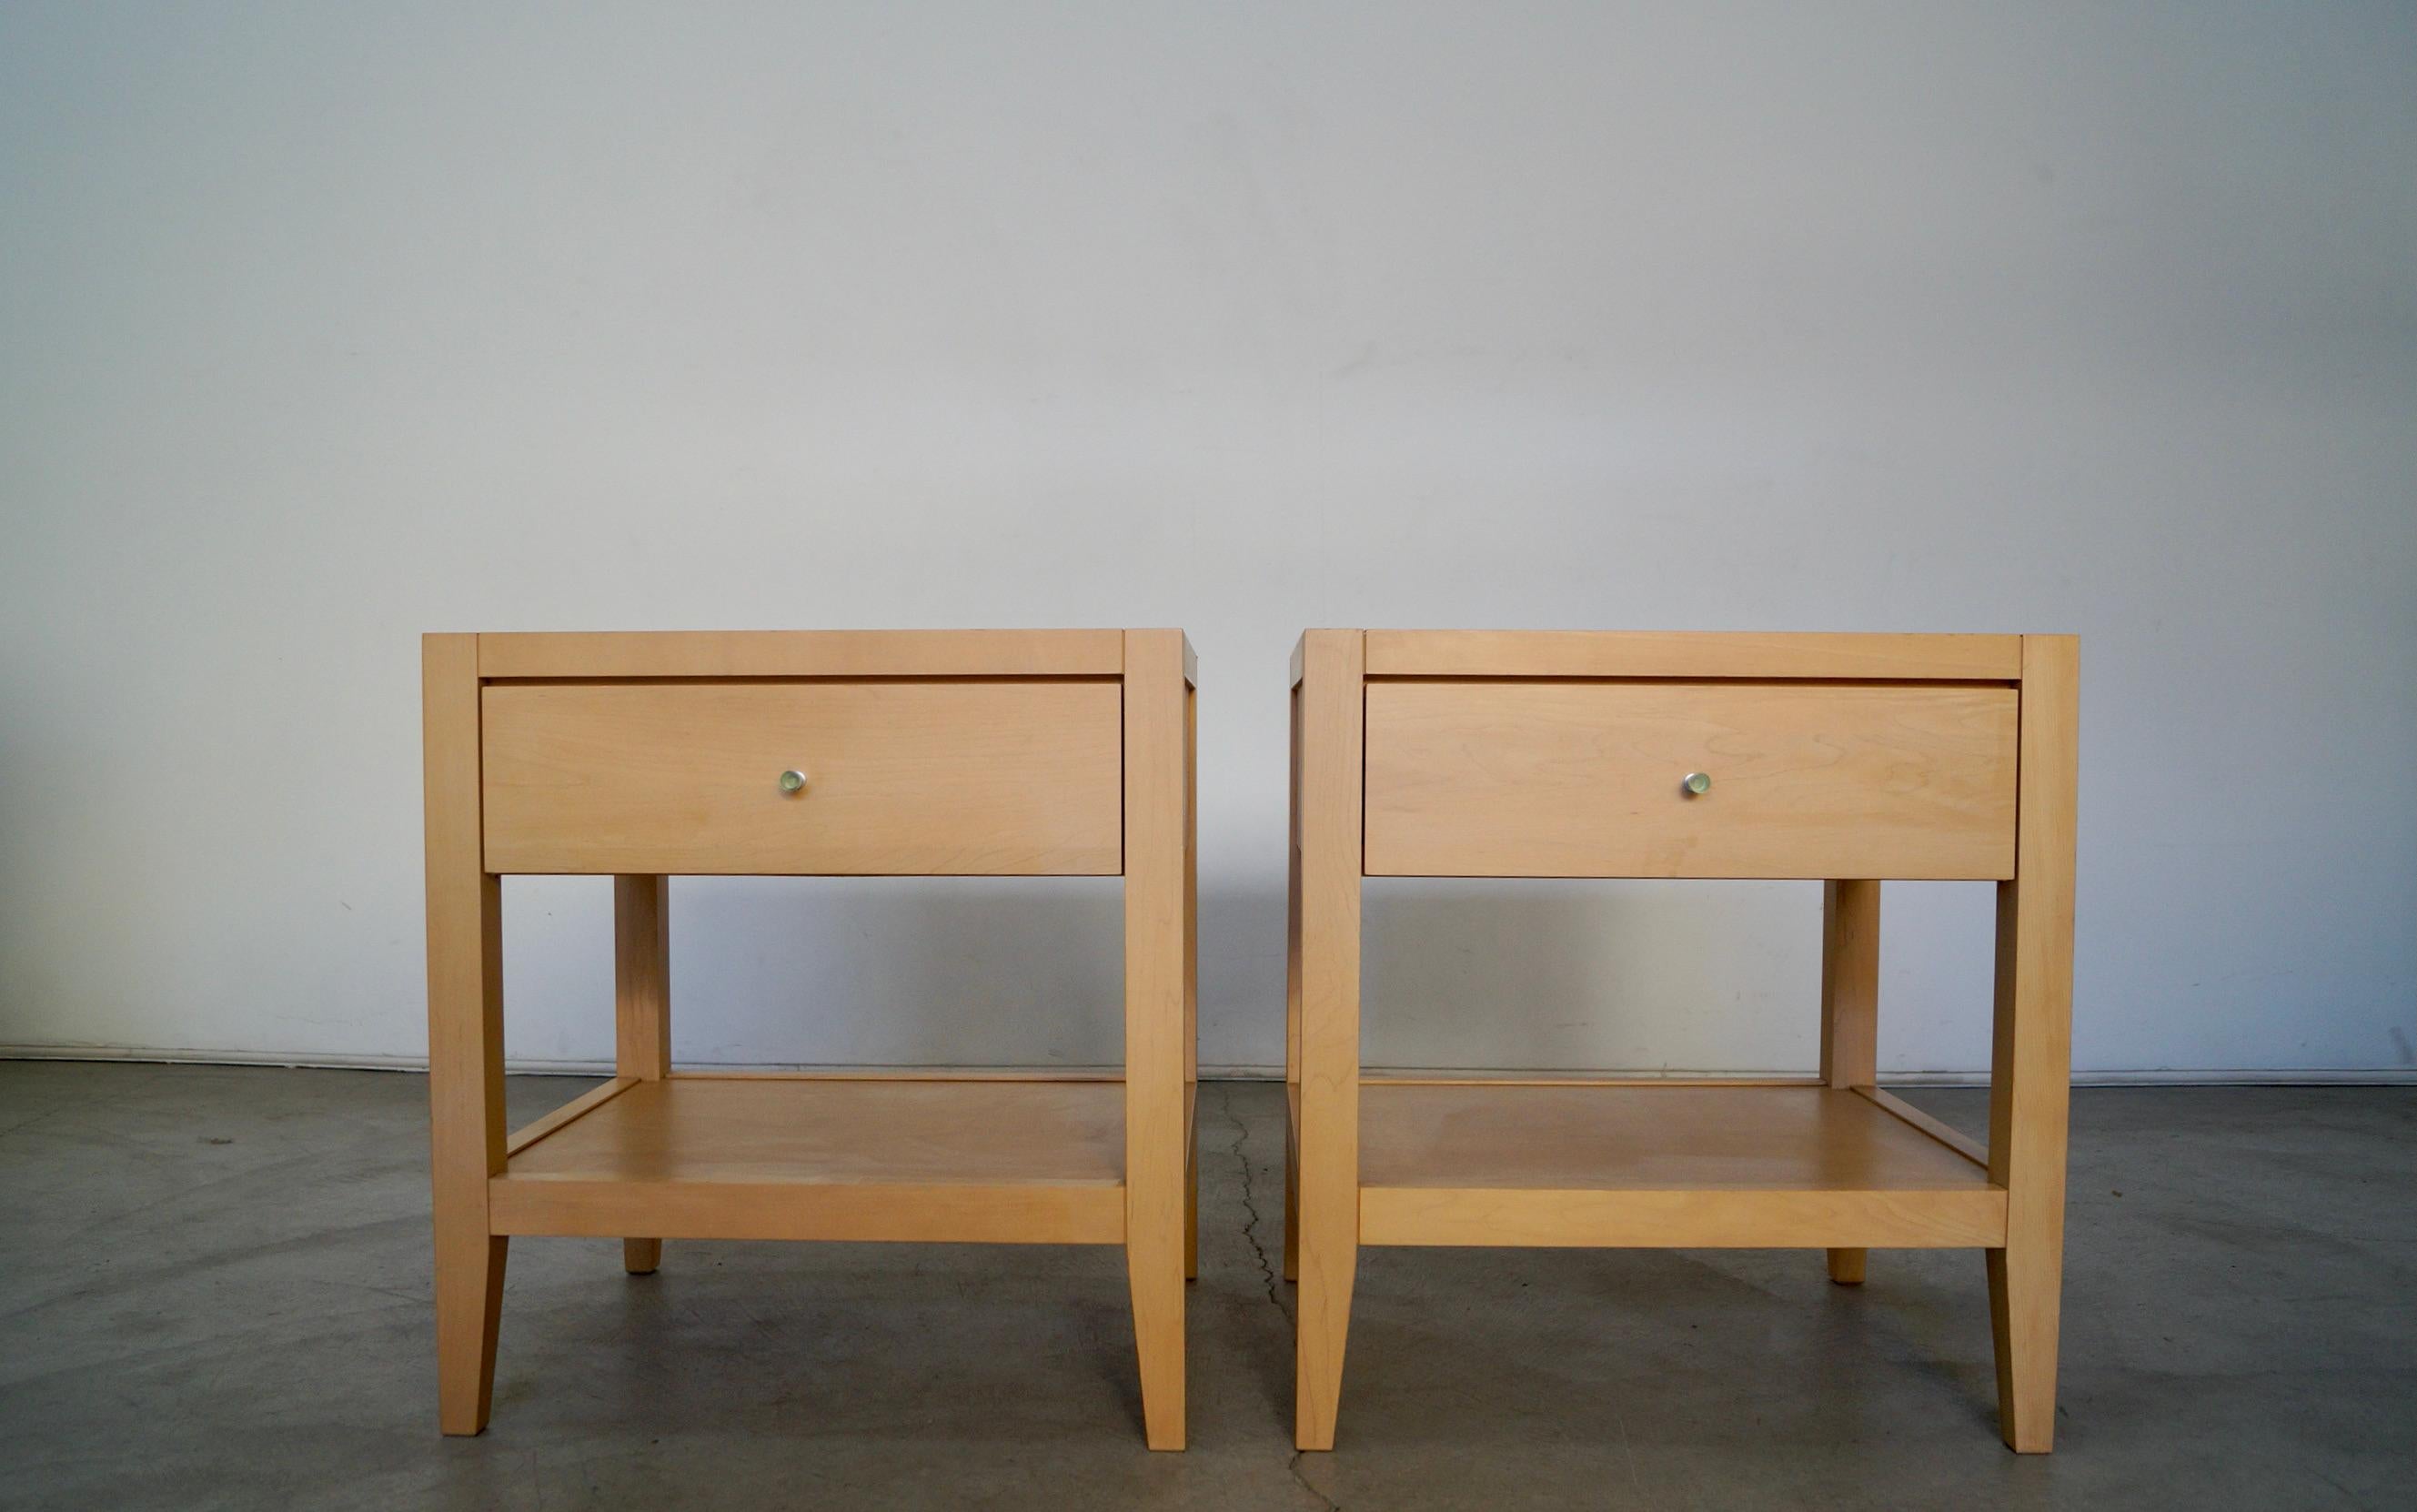 Pair of vintage post-modern night stands for sale. Manufactured by the high-end Baronet Furniture company, and made in Canada. These are dated back to 1998, and have a stamp in the drawer. They are really high-quality pieces with a Mid-century